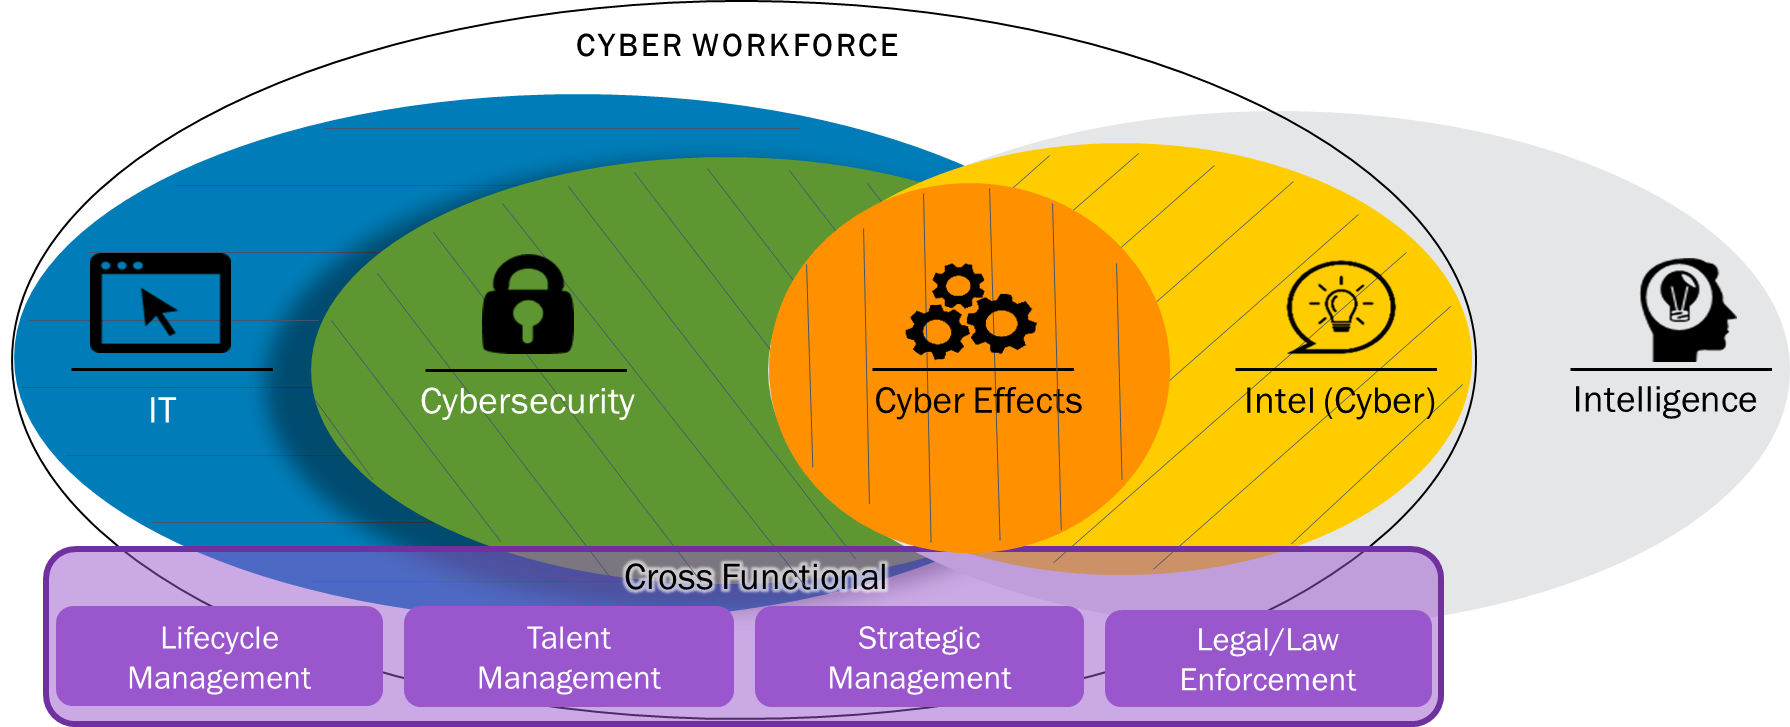 Venn diagram showing the area of influnce impacted by cyber - information technology, cybersecurity, intelligence gathering and analysis.